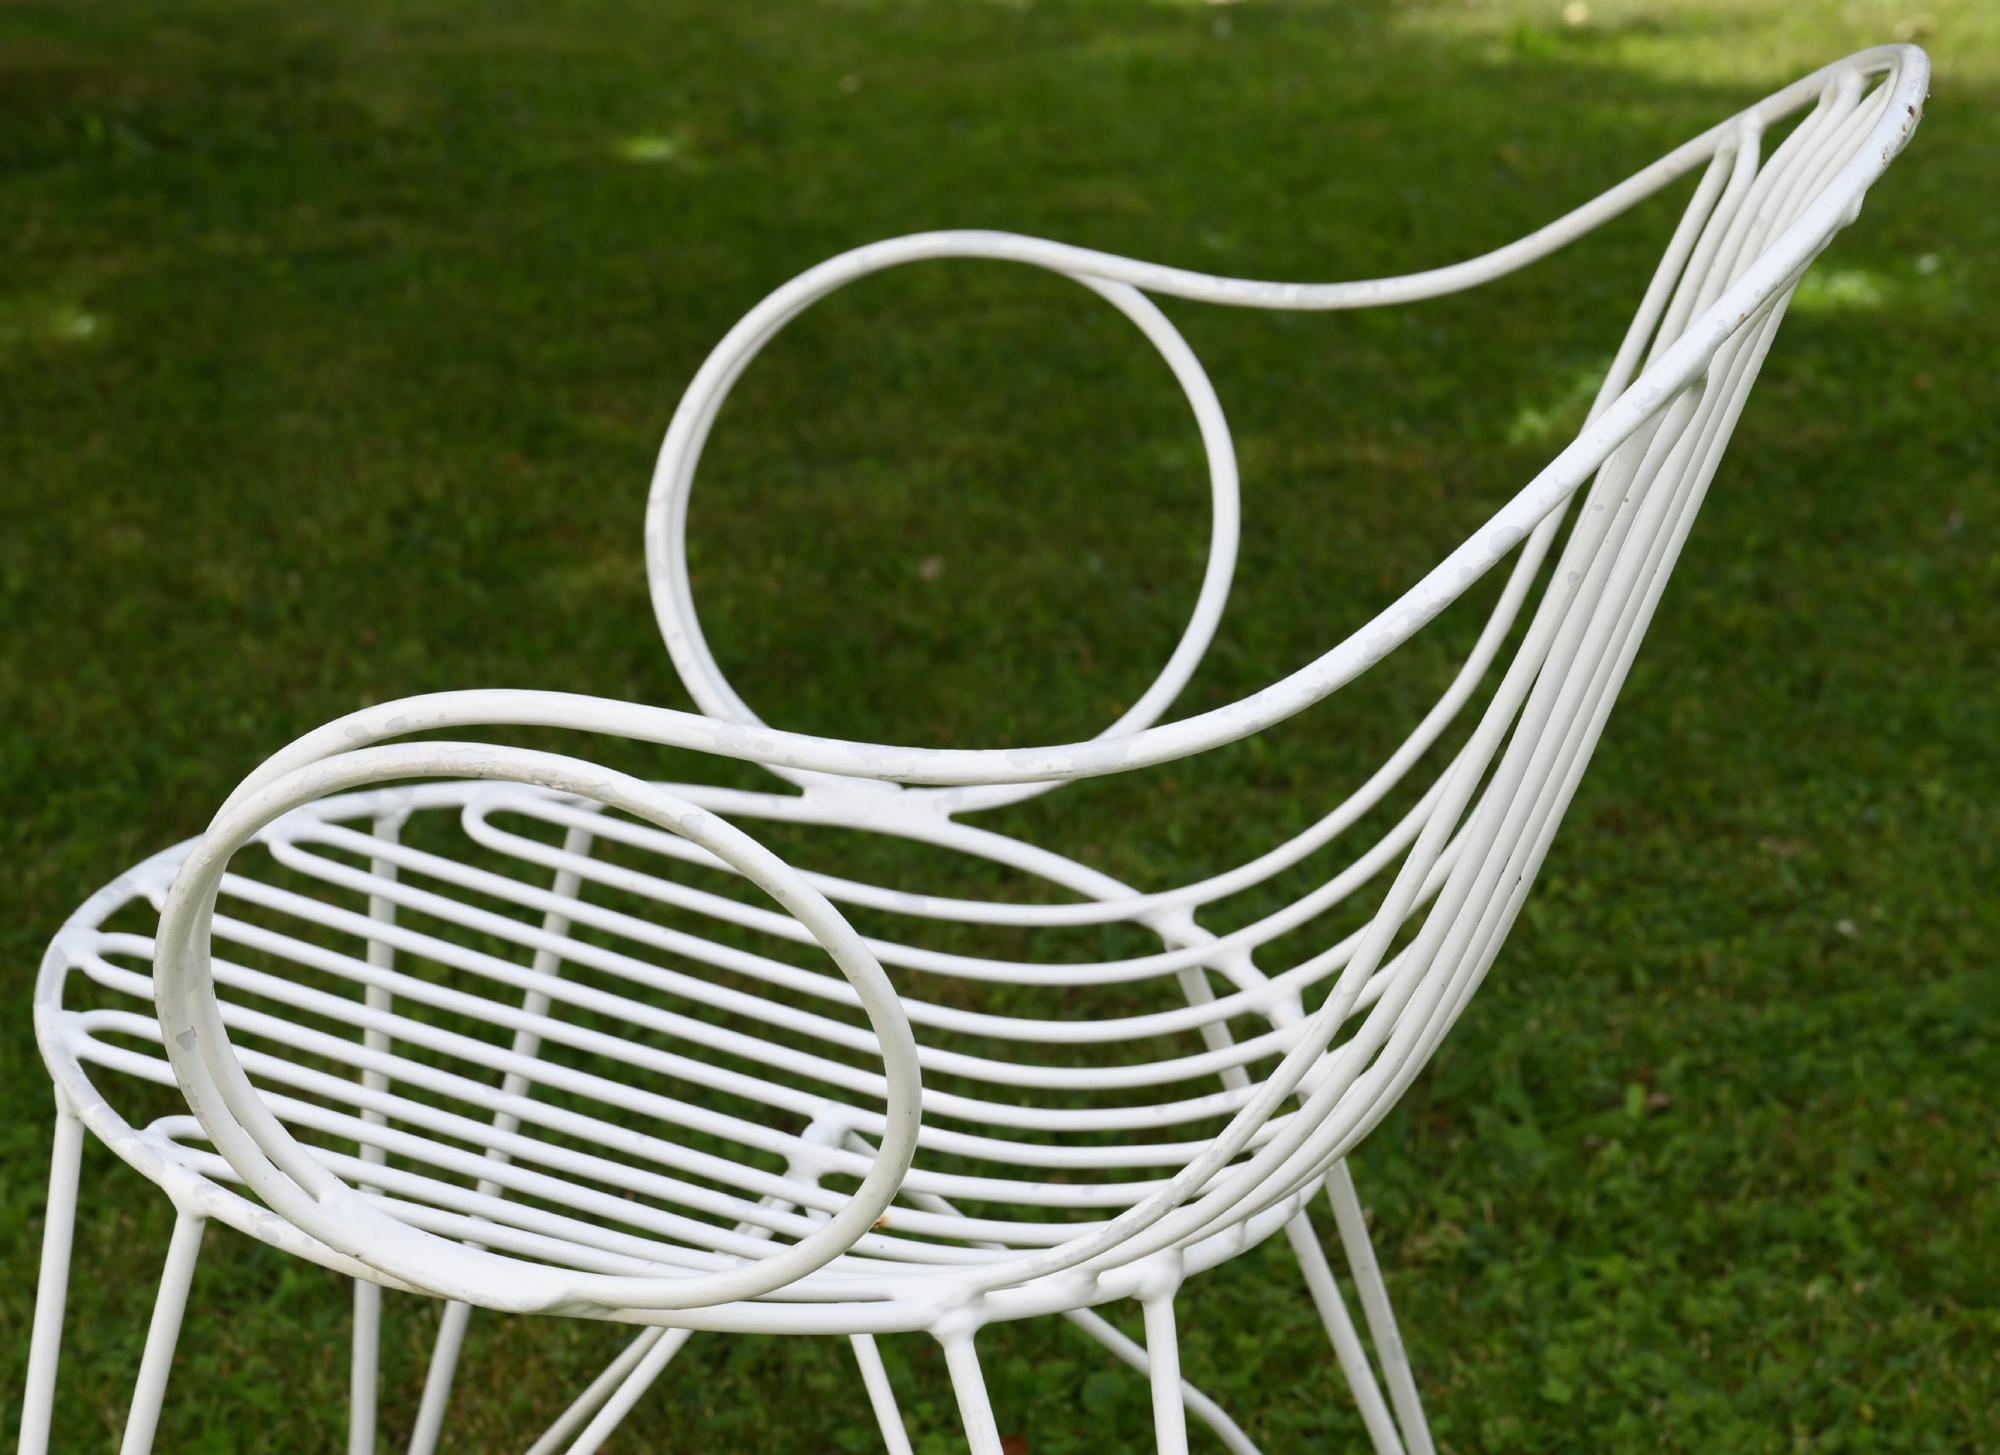 Set of Midcentury Garden Chairs and Table, Iron, White Painted, German In Good Condition For Sale In Epfach, DE